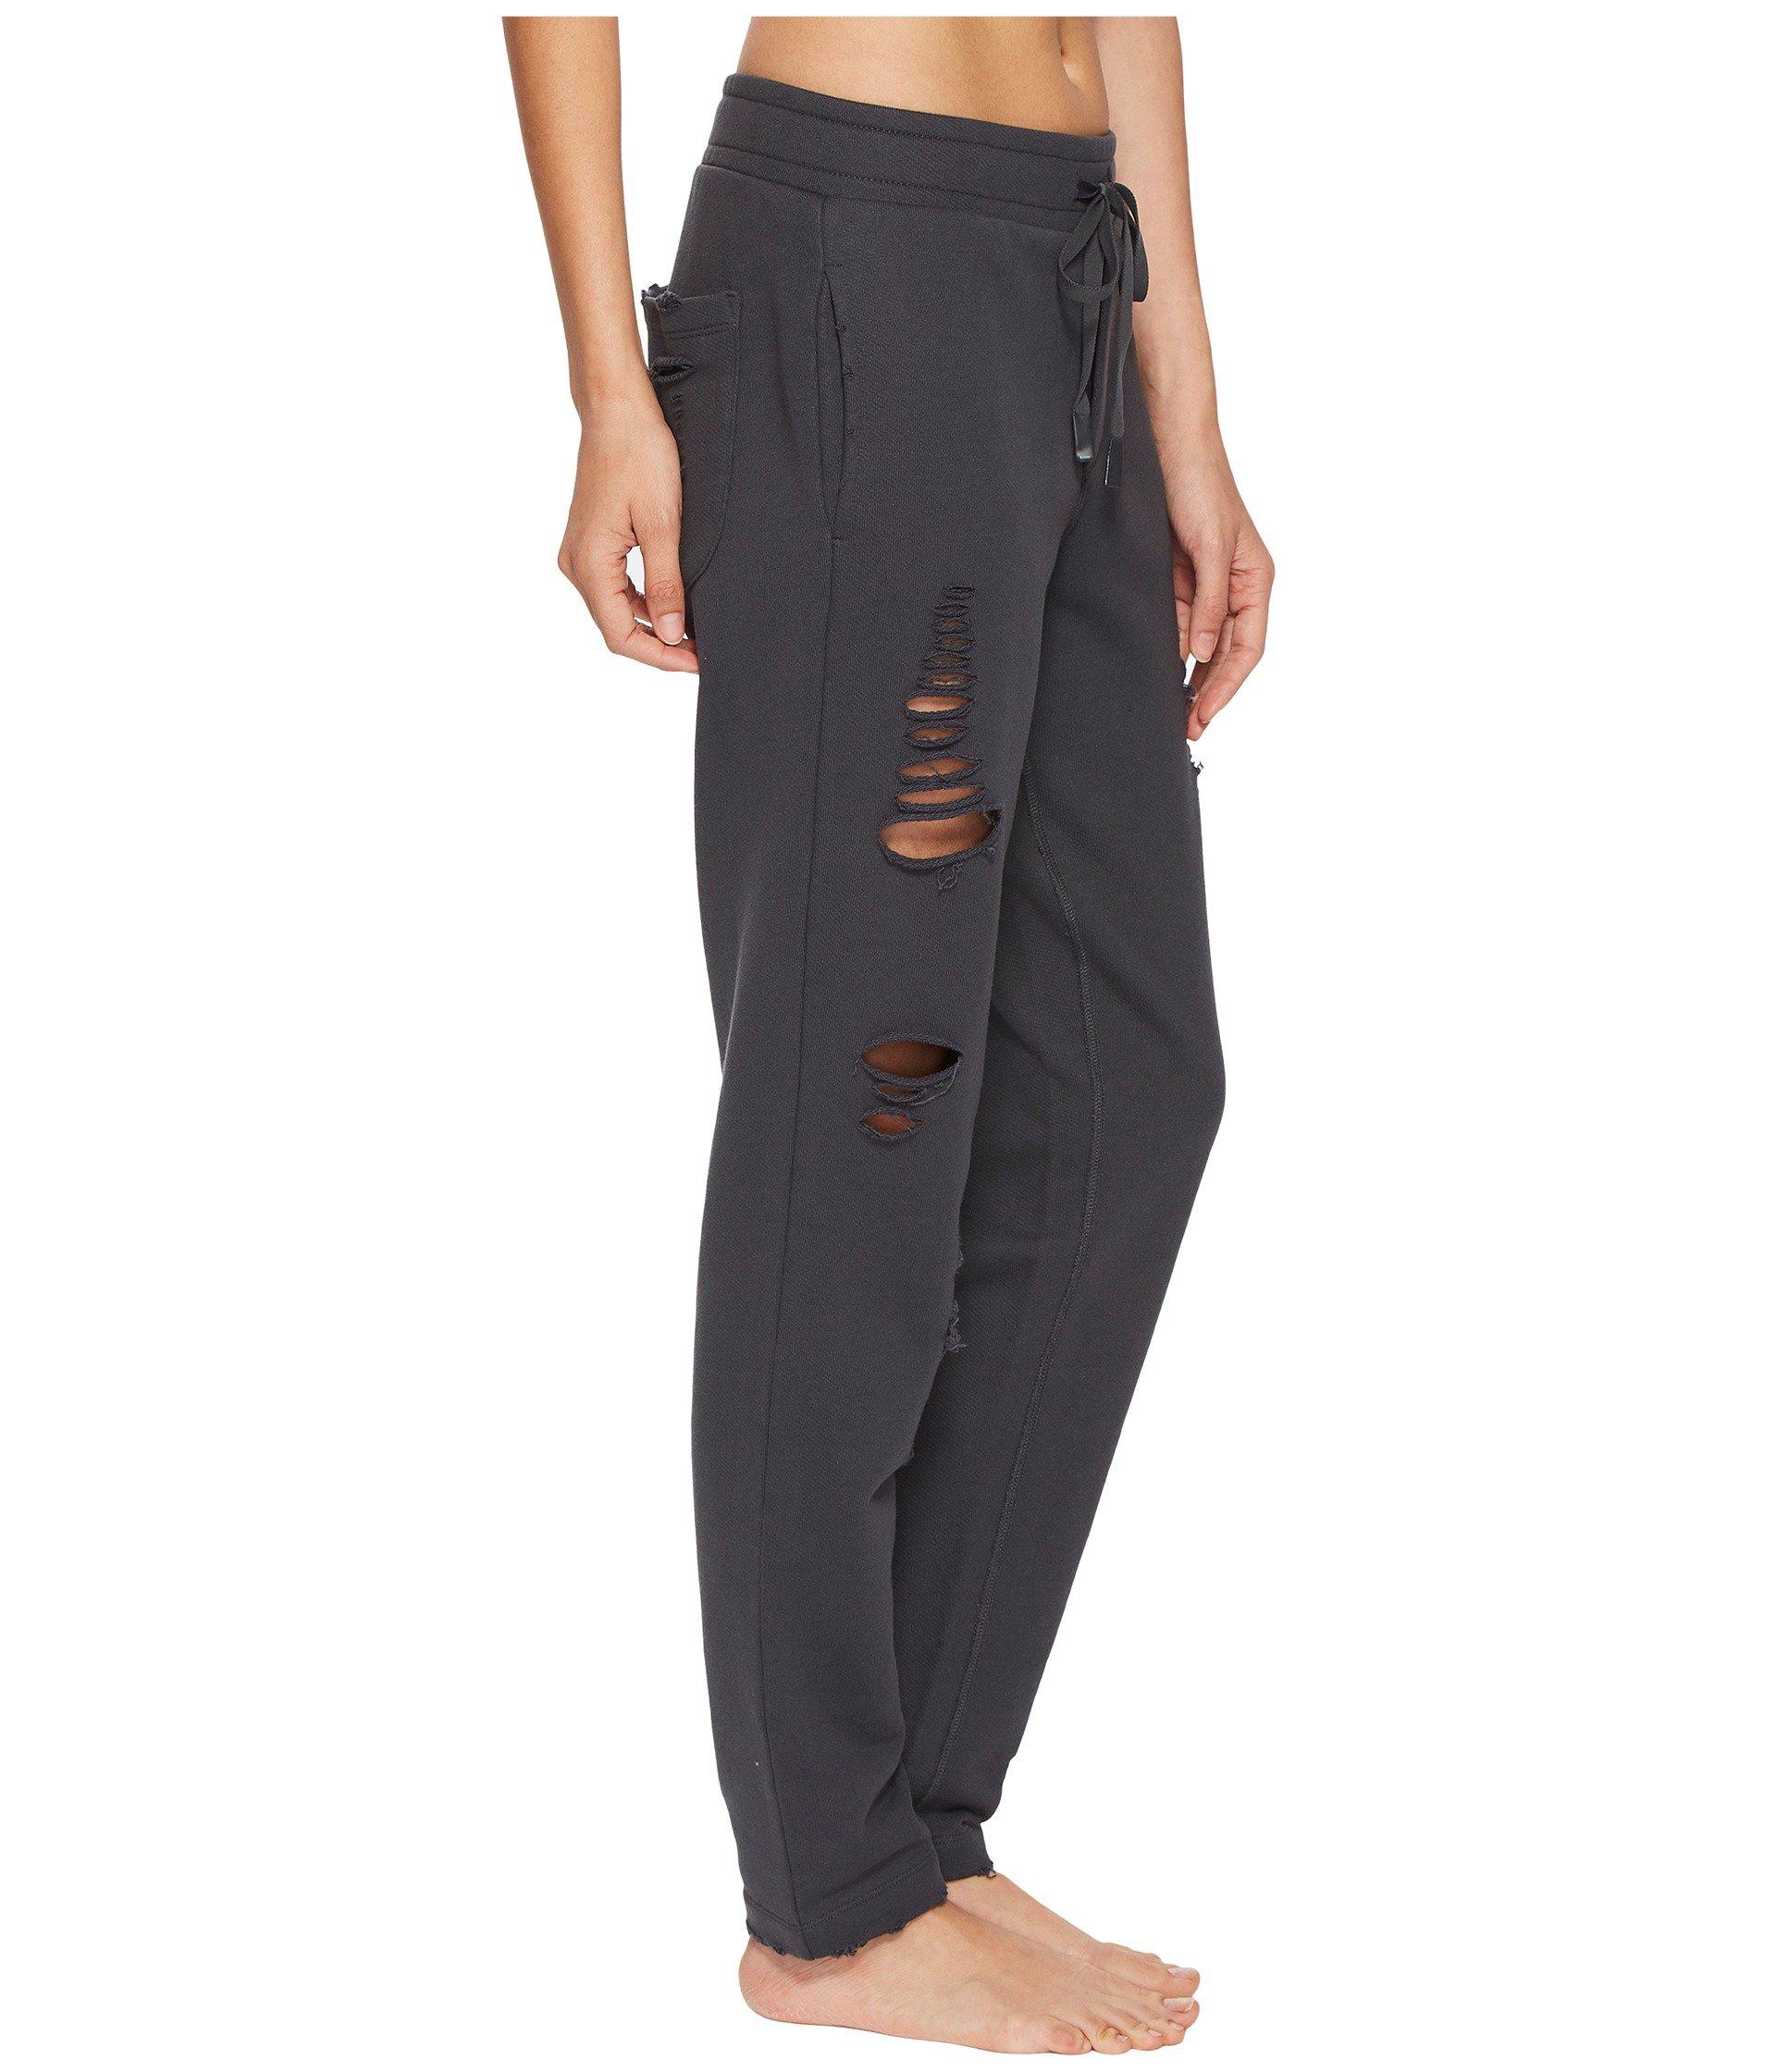 Buy Black Cotton Ripped Track Pants online | Looksgud.in